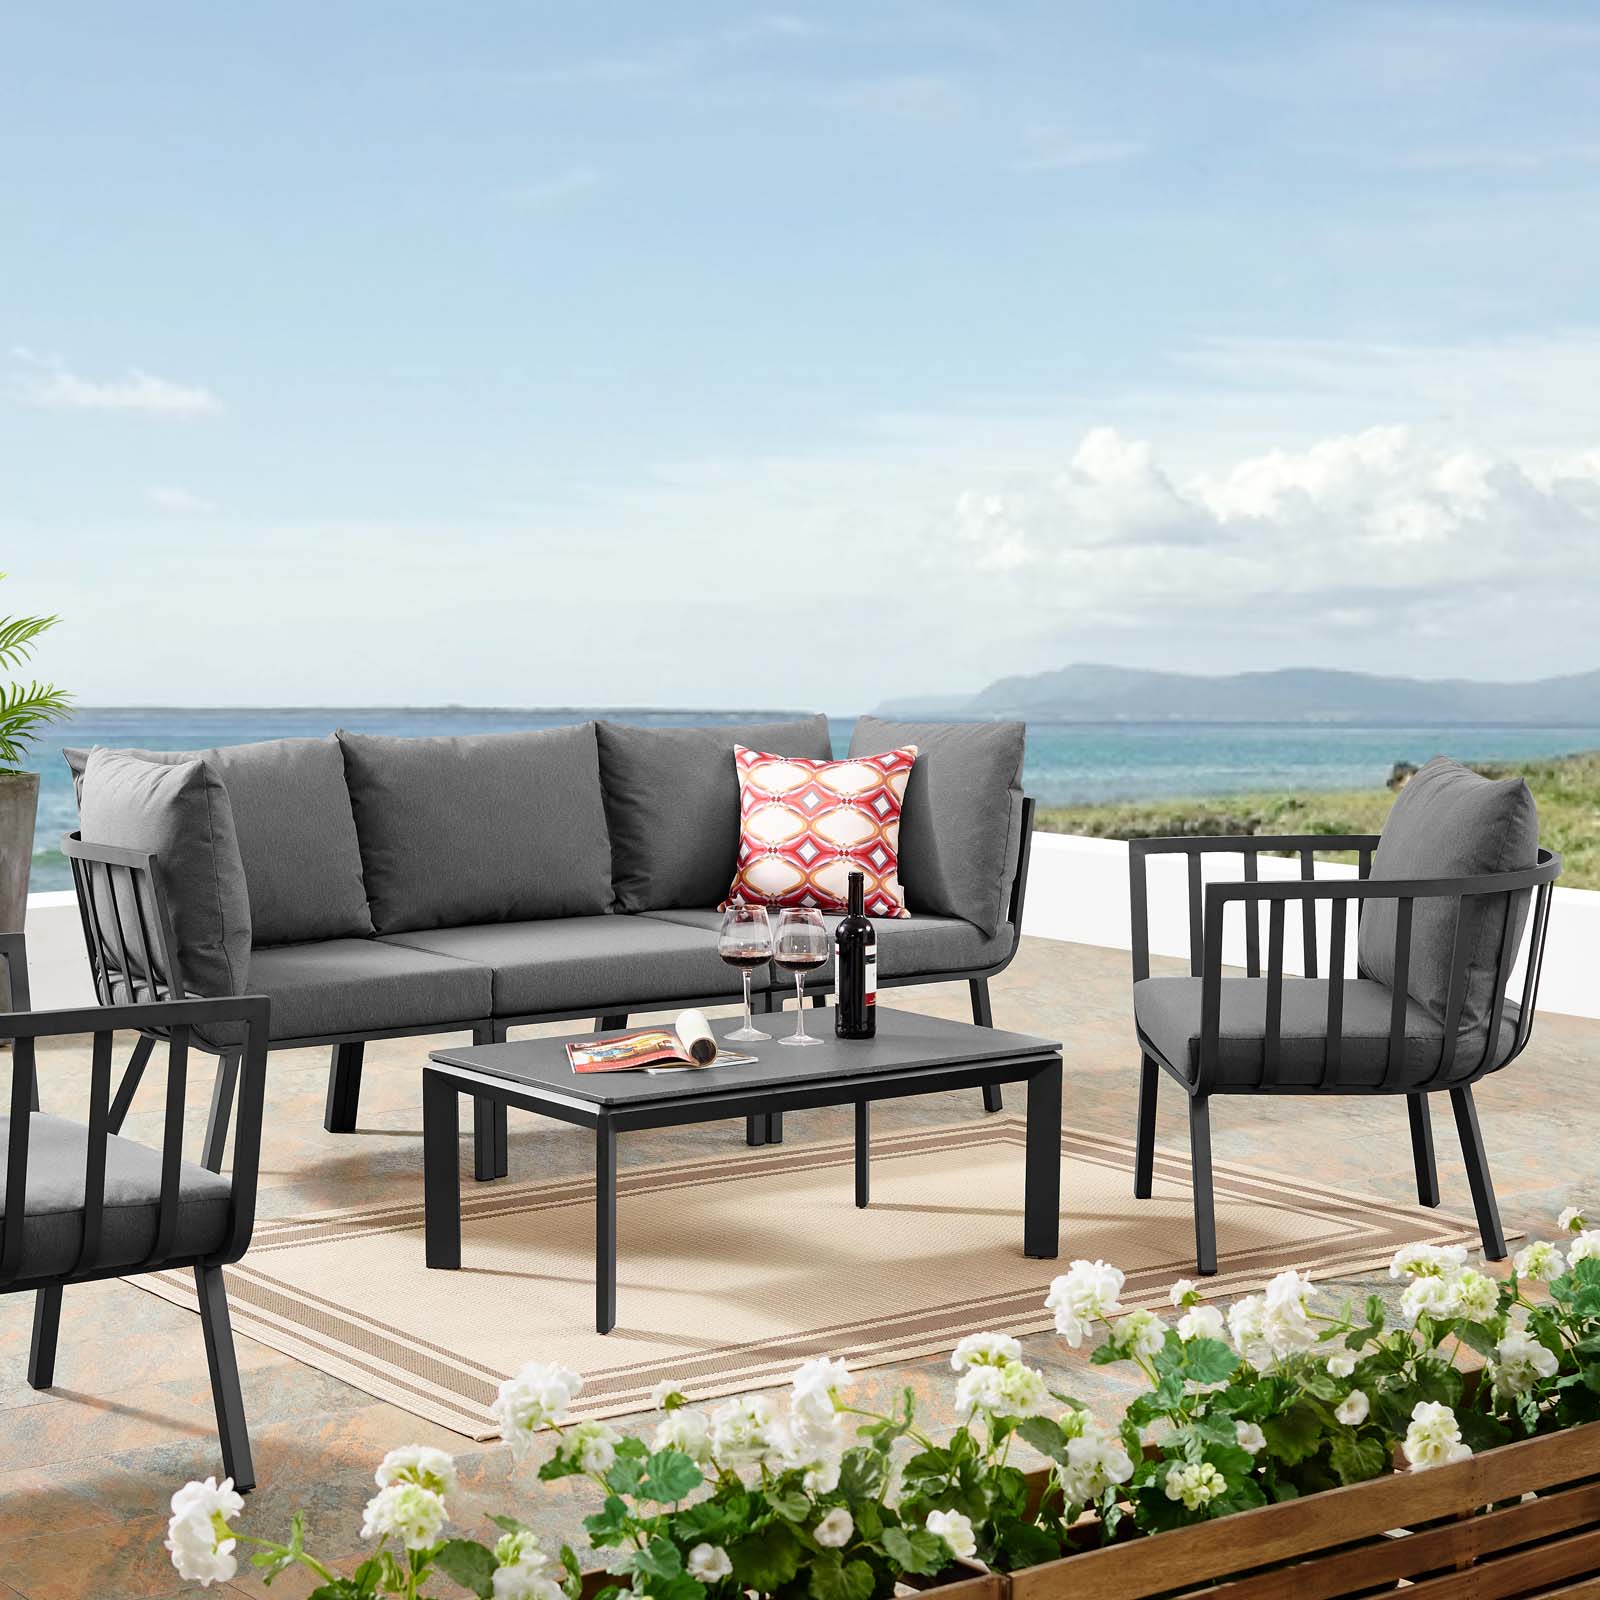 Modway Riverside 5 Piece Outdoor Patio Aluminum Set in Gray Charcoal - image 1 of 10